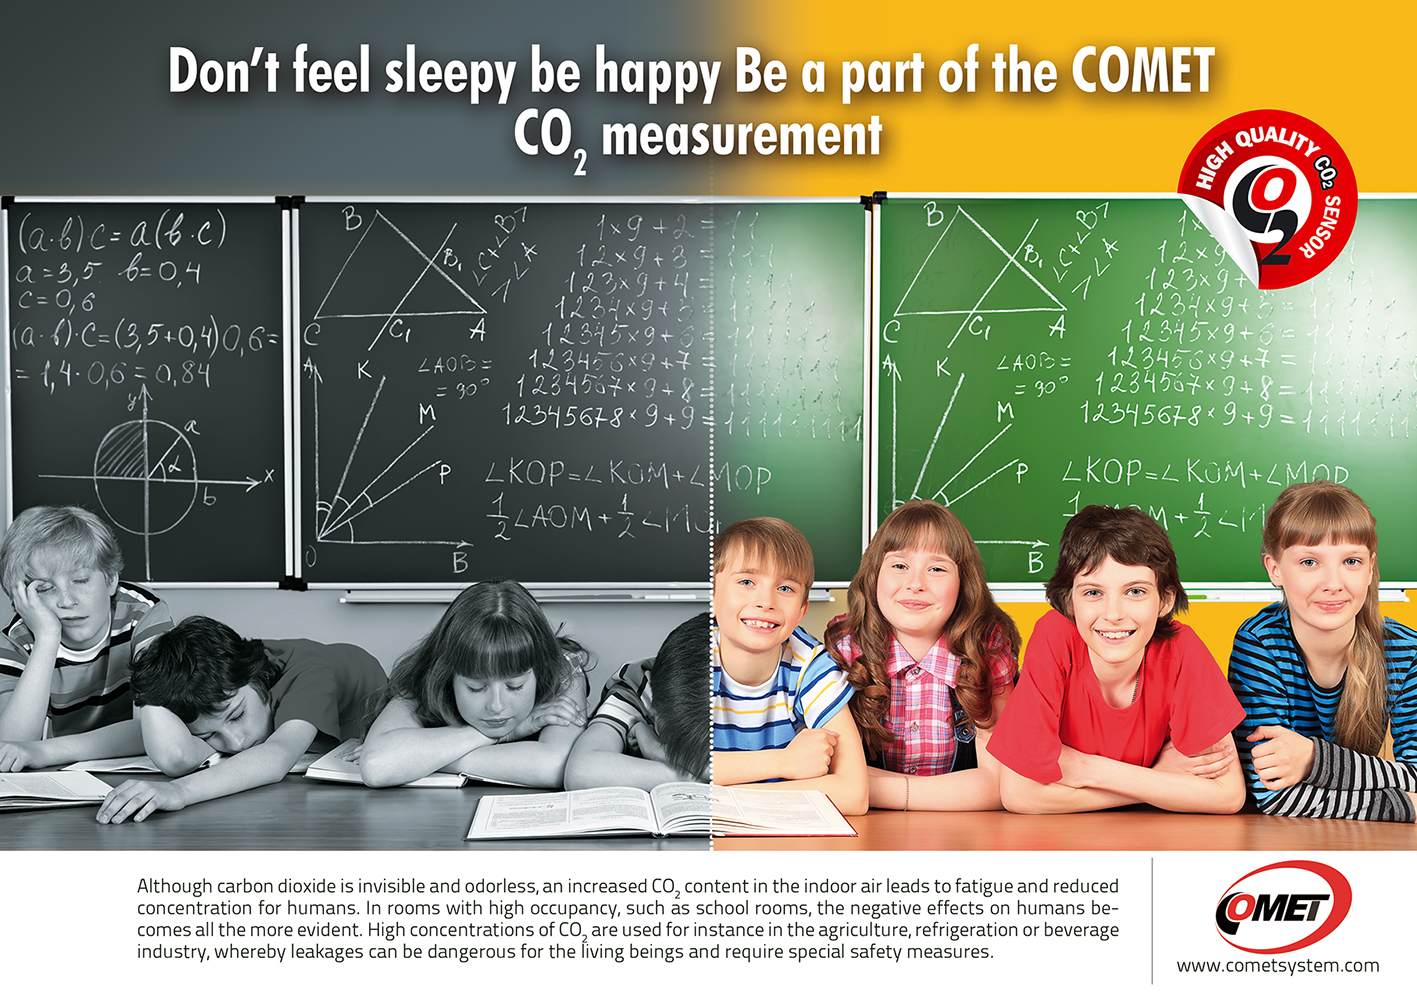 Be Fresh with COMET CO2 measuring